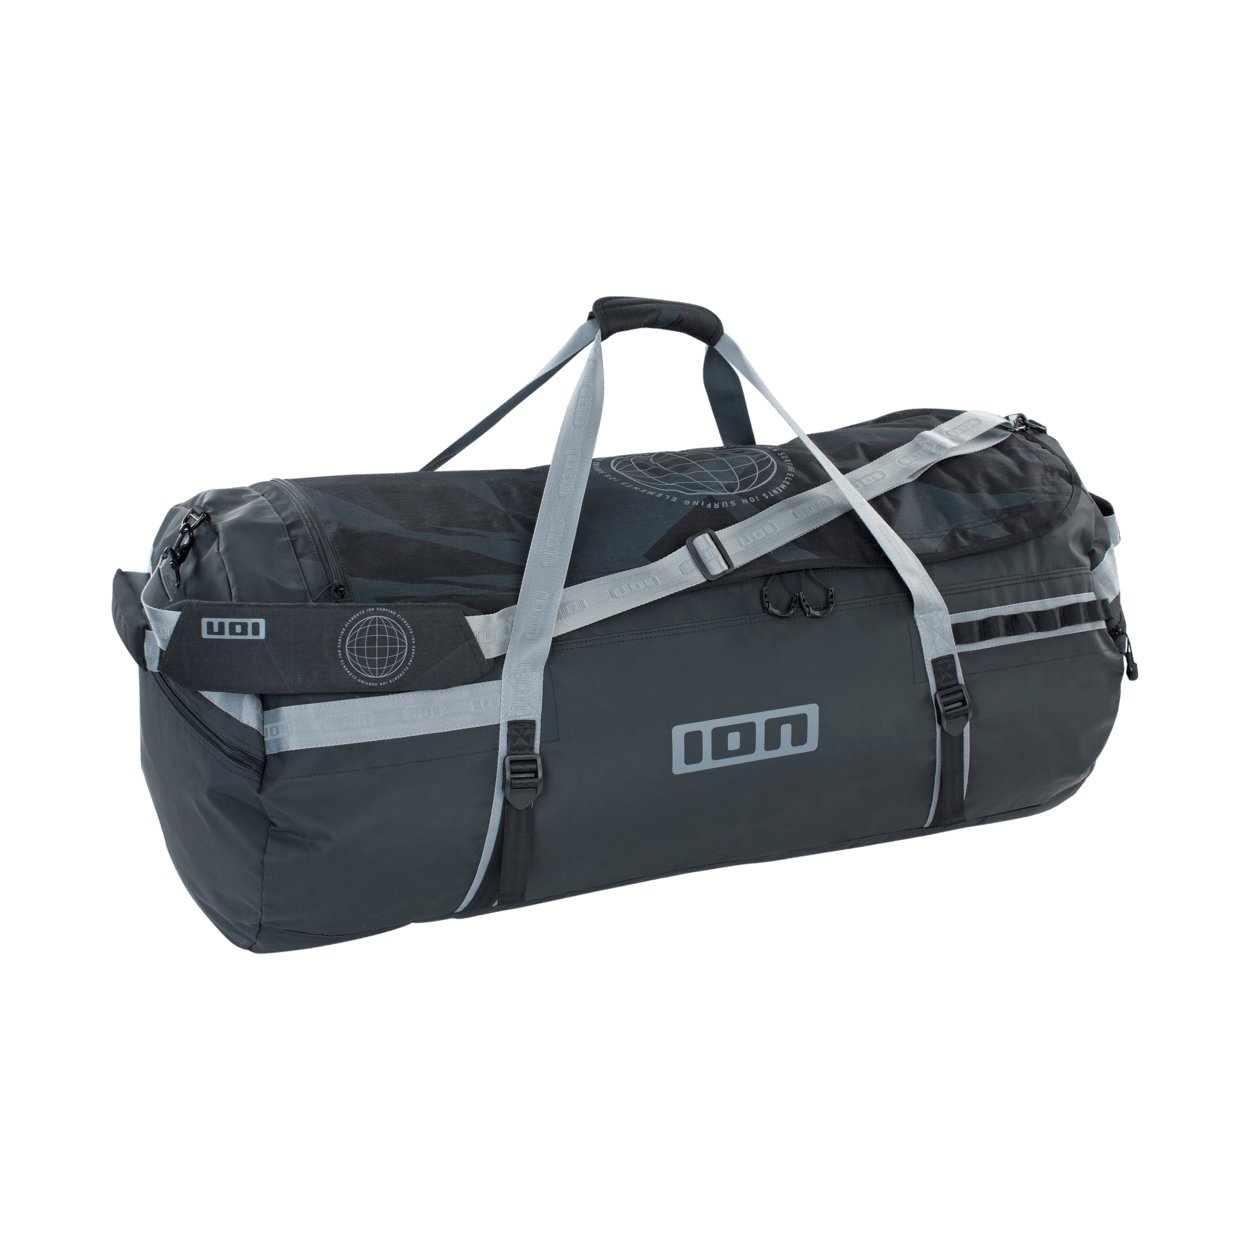 ION Suspect Duffel Bag 2022 - Worthing Watersports - 9010583059686 - Bags - ION Water